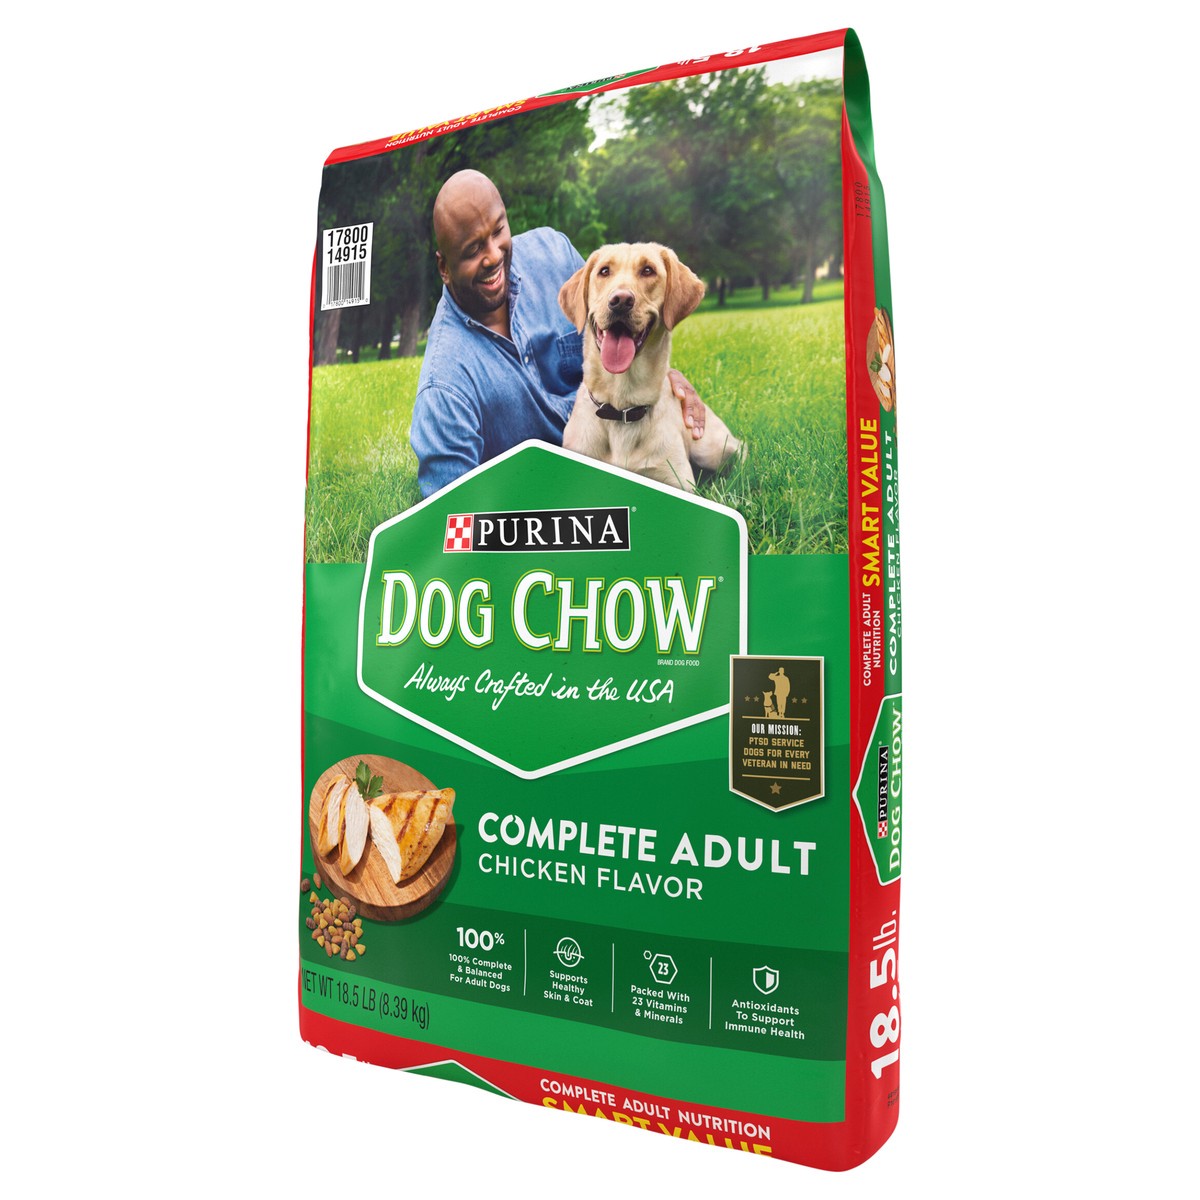 slide 2 of 9, Dog Chow Purina Dog Chow Complete Adult Dry Dog Food Kibble With Chicken Flavor, 18.5 lb